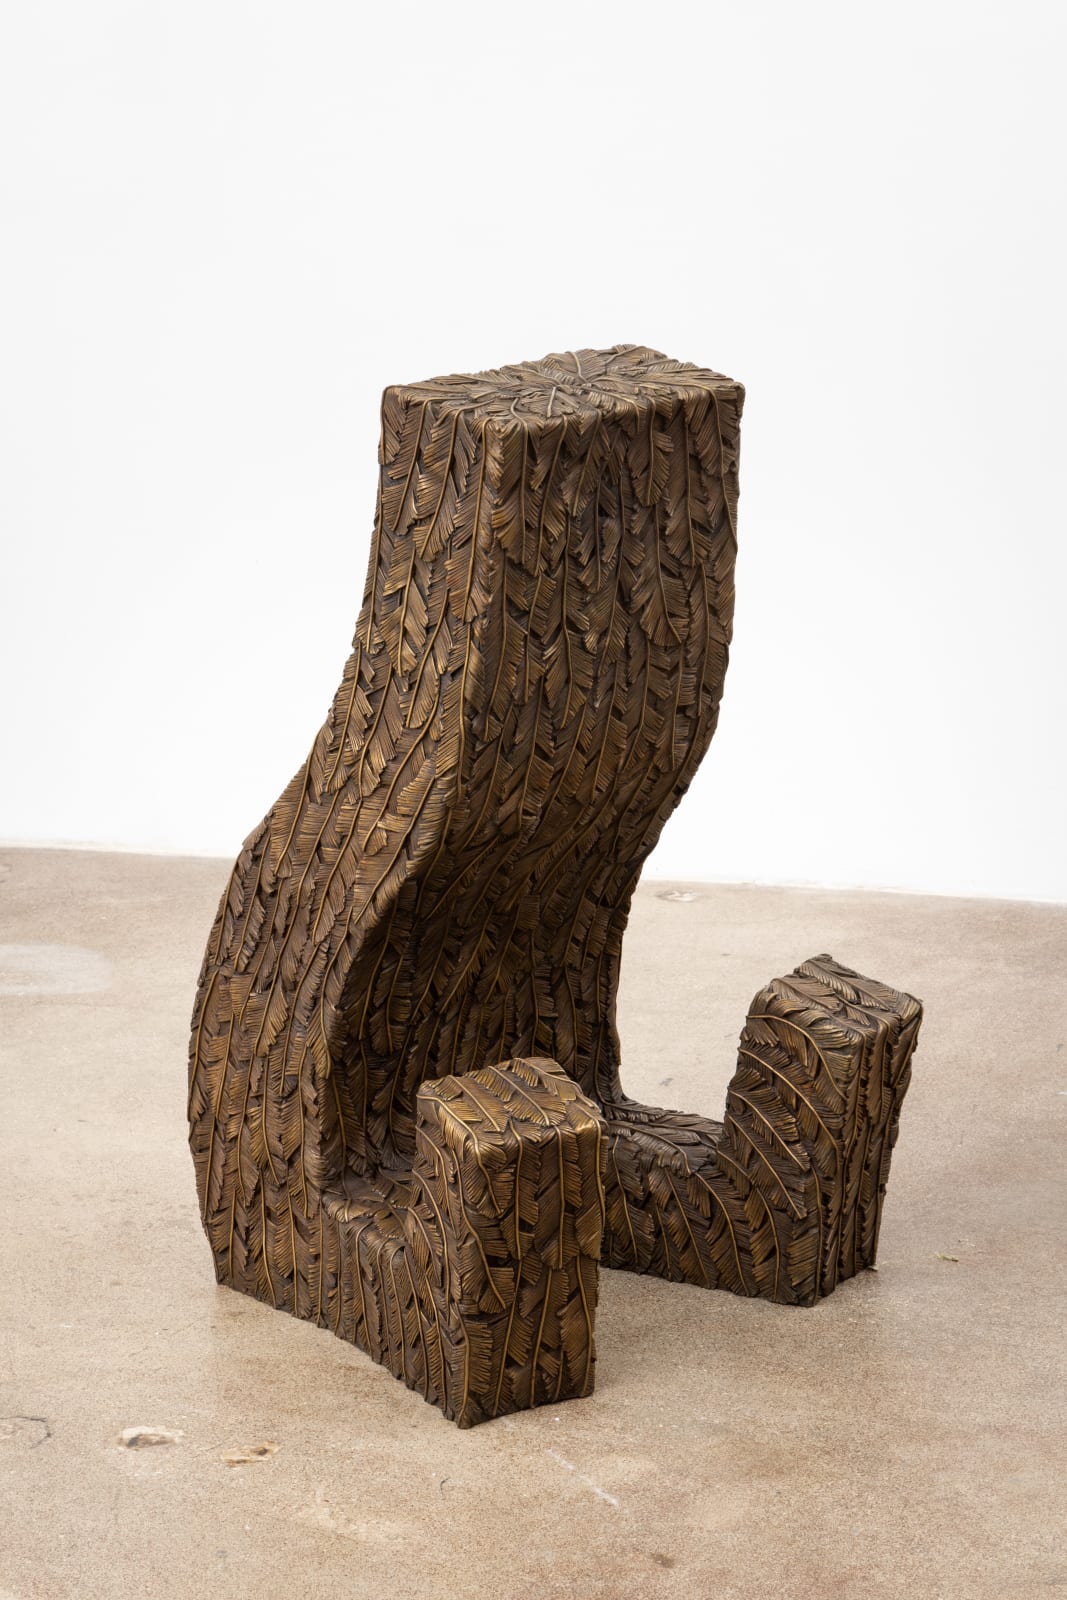 Free-standing bronze sculpture of a rectangular form sitting with outstretched legs. The sculpture is cast in surface texture resembling feathers and treated with a golden brown patina. 